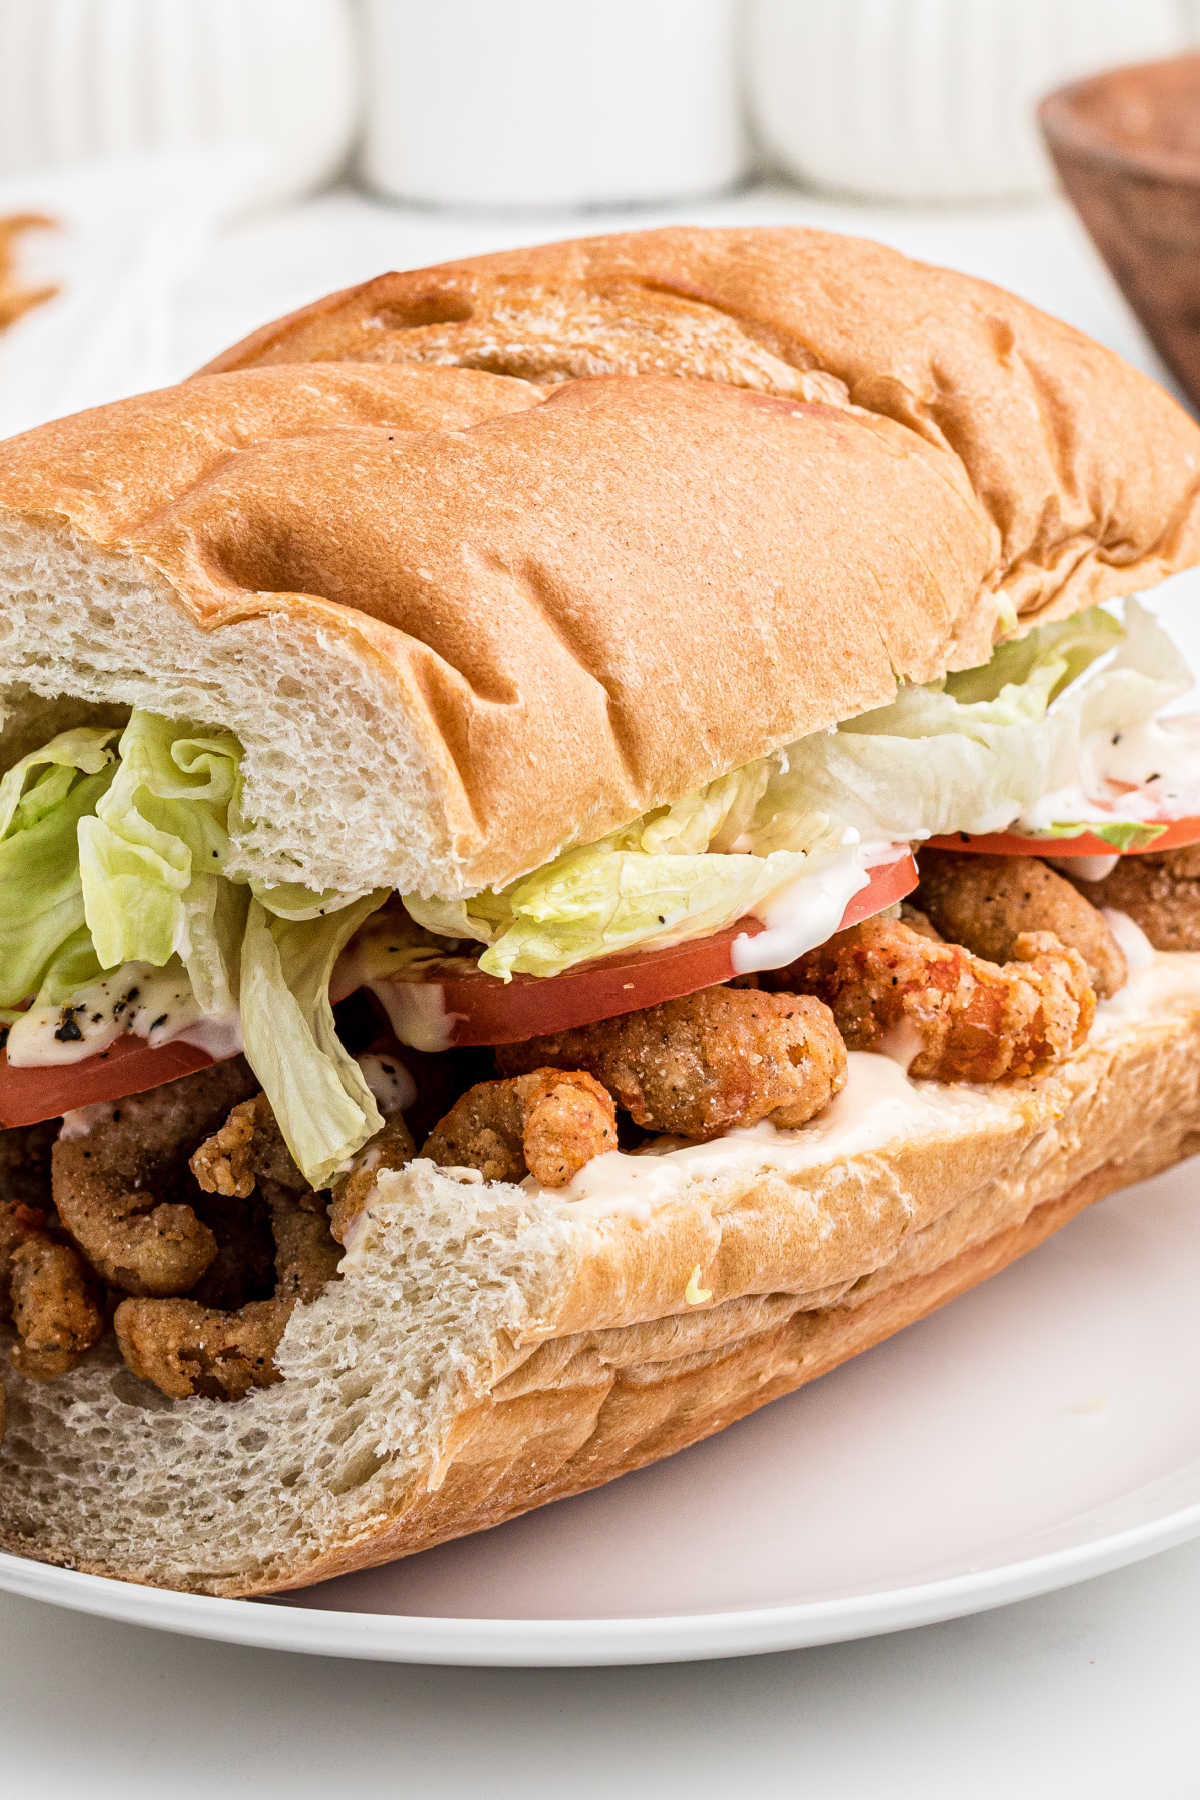 Close up of a bread sub filled with fried crawfish , dressed with lettuce, tomato and mayonnaise.